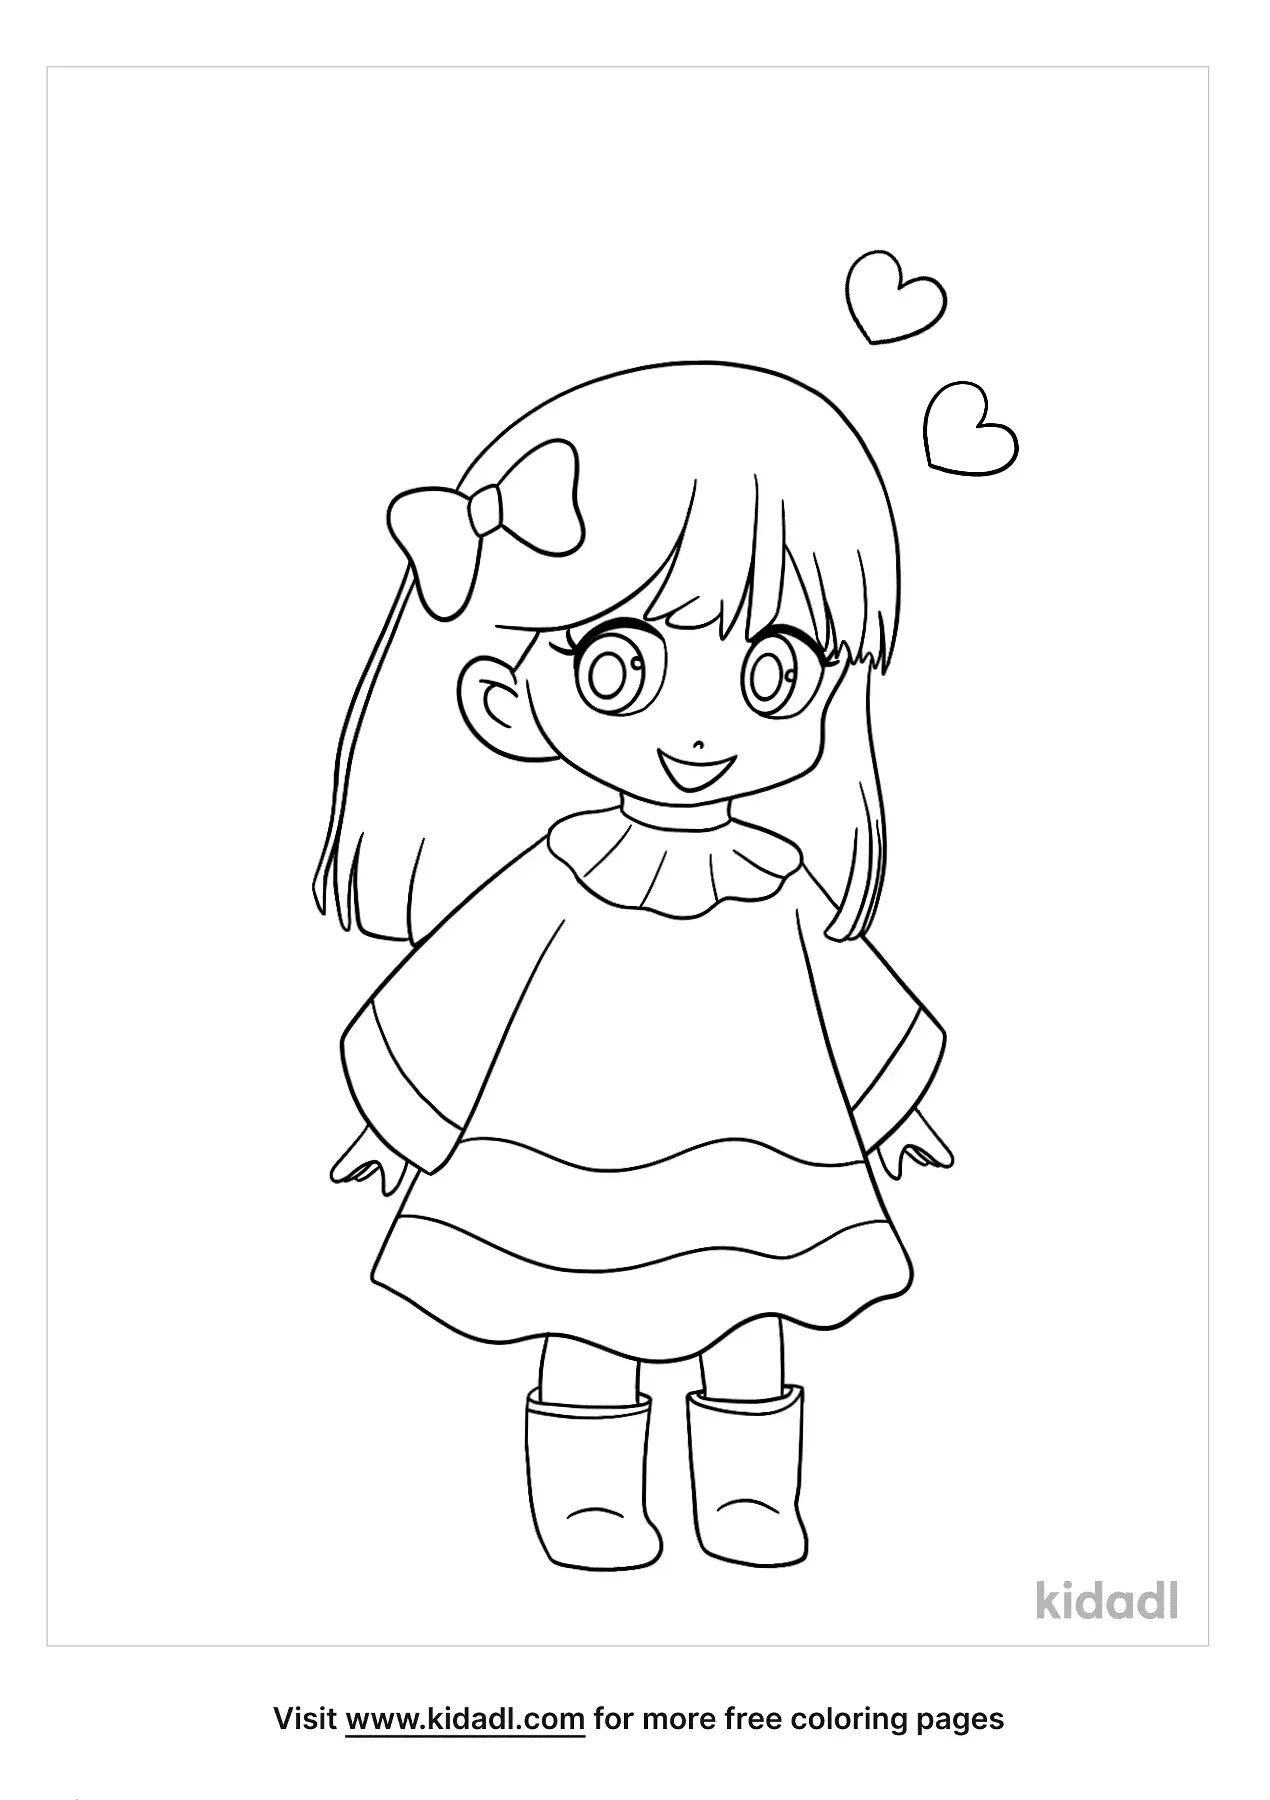 Free Cute Anime Coloring Page | Coloring Page Printables | Kidadl